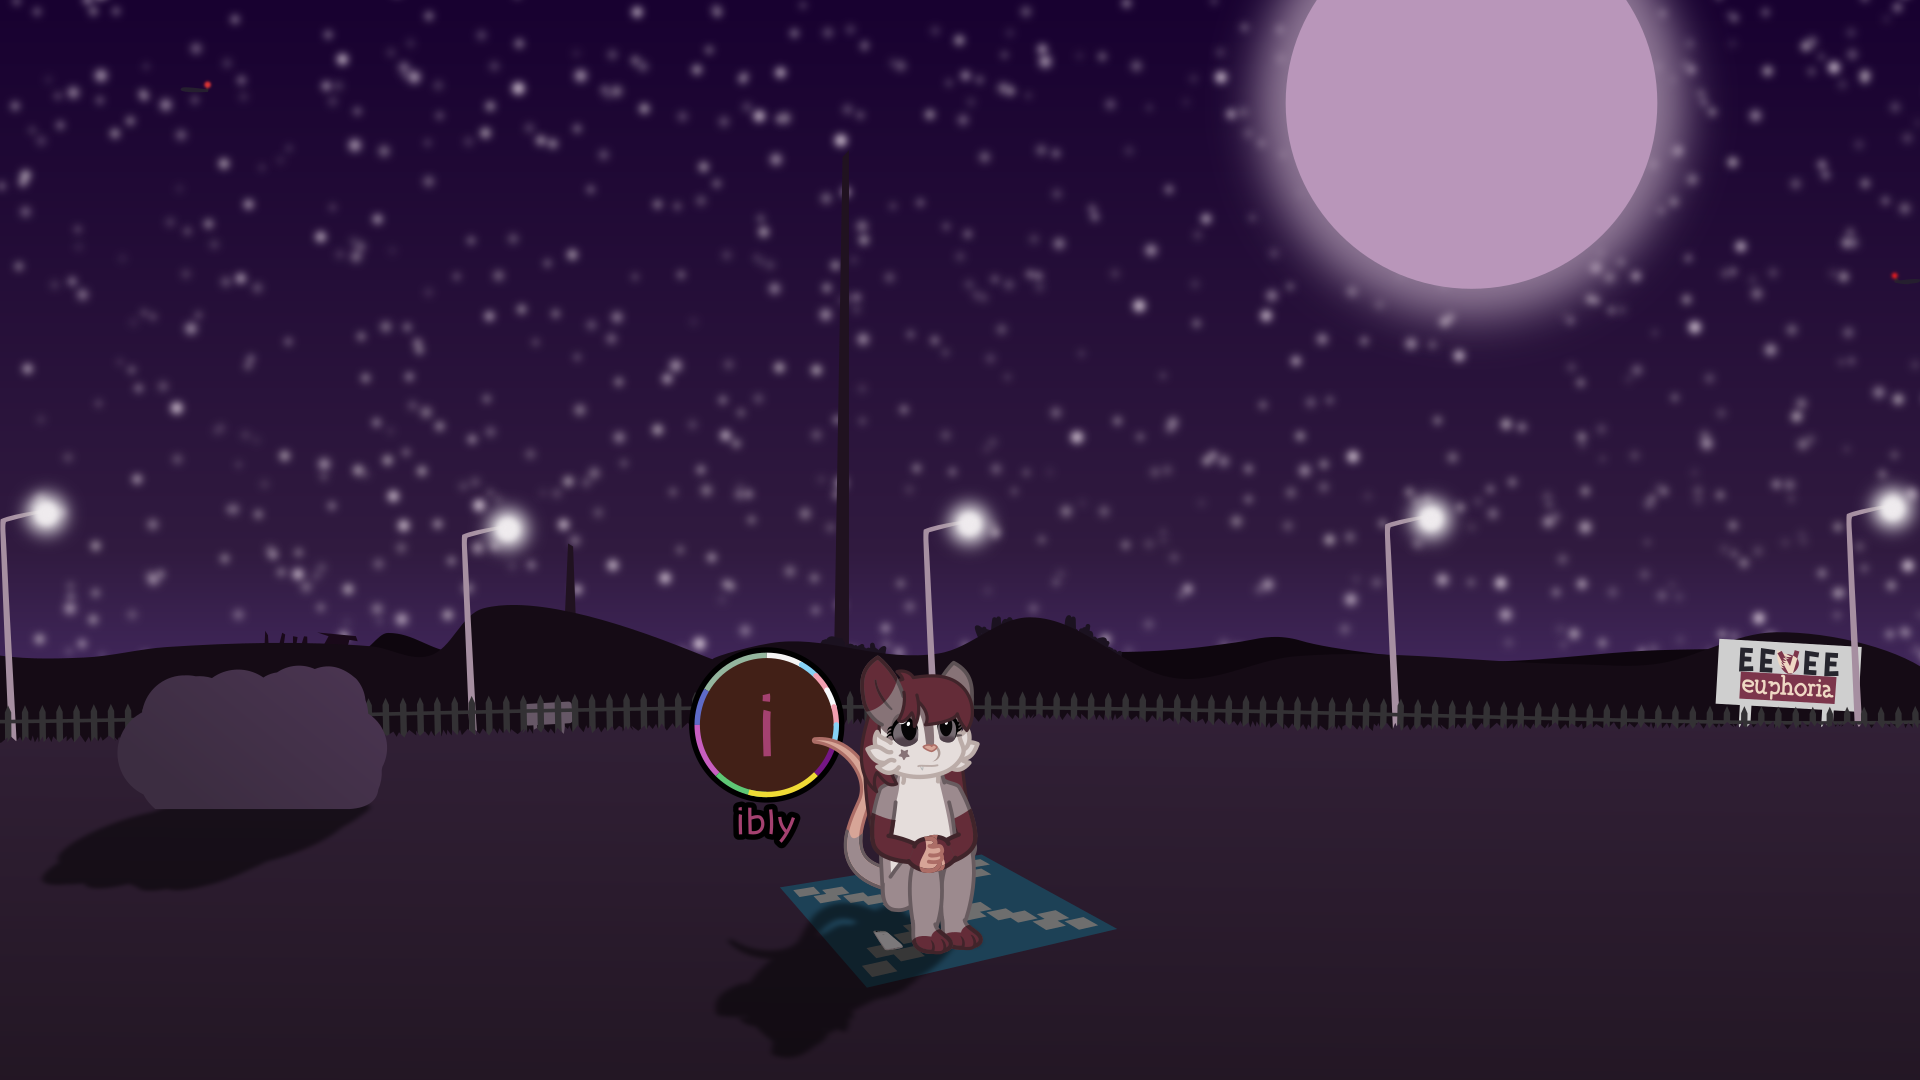 A possum is sitting down in the middle of a grassy field at night, with a concerned expression on her face. Behind her are a bunch of street lamps.